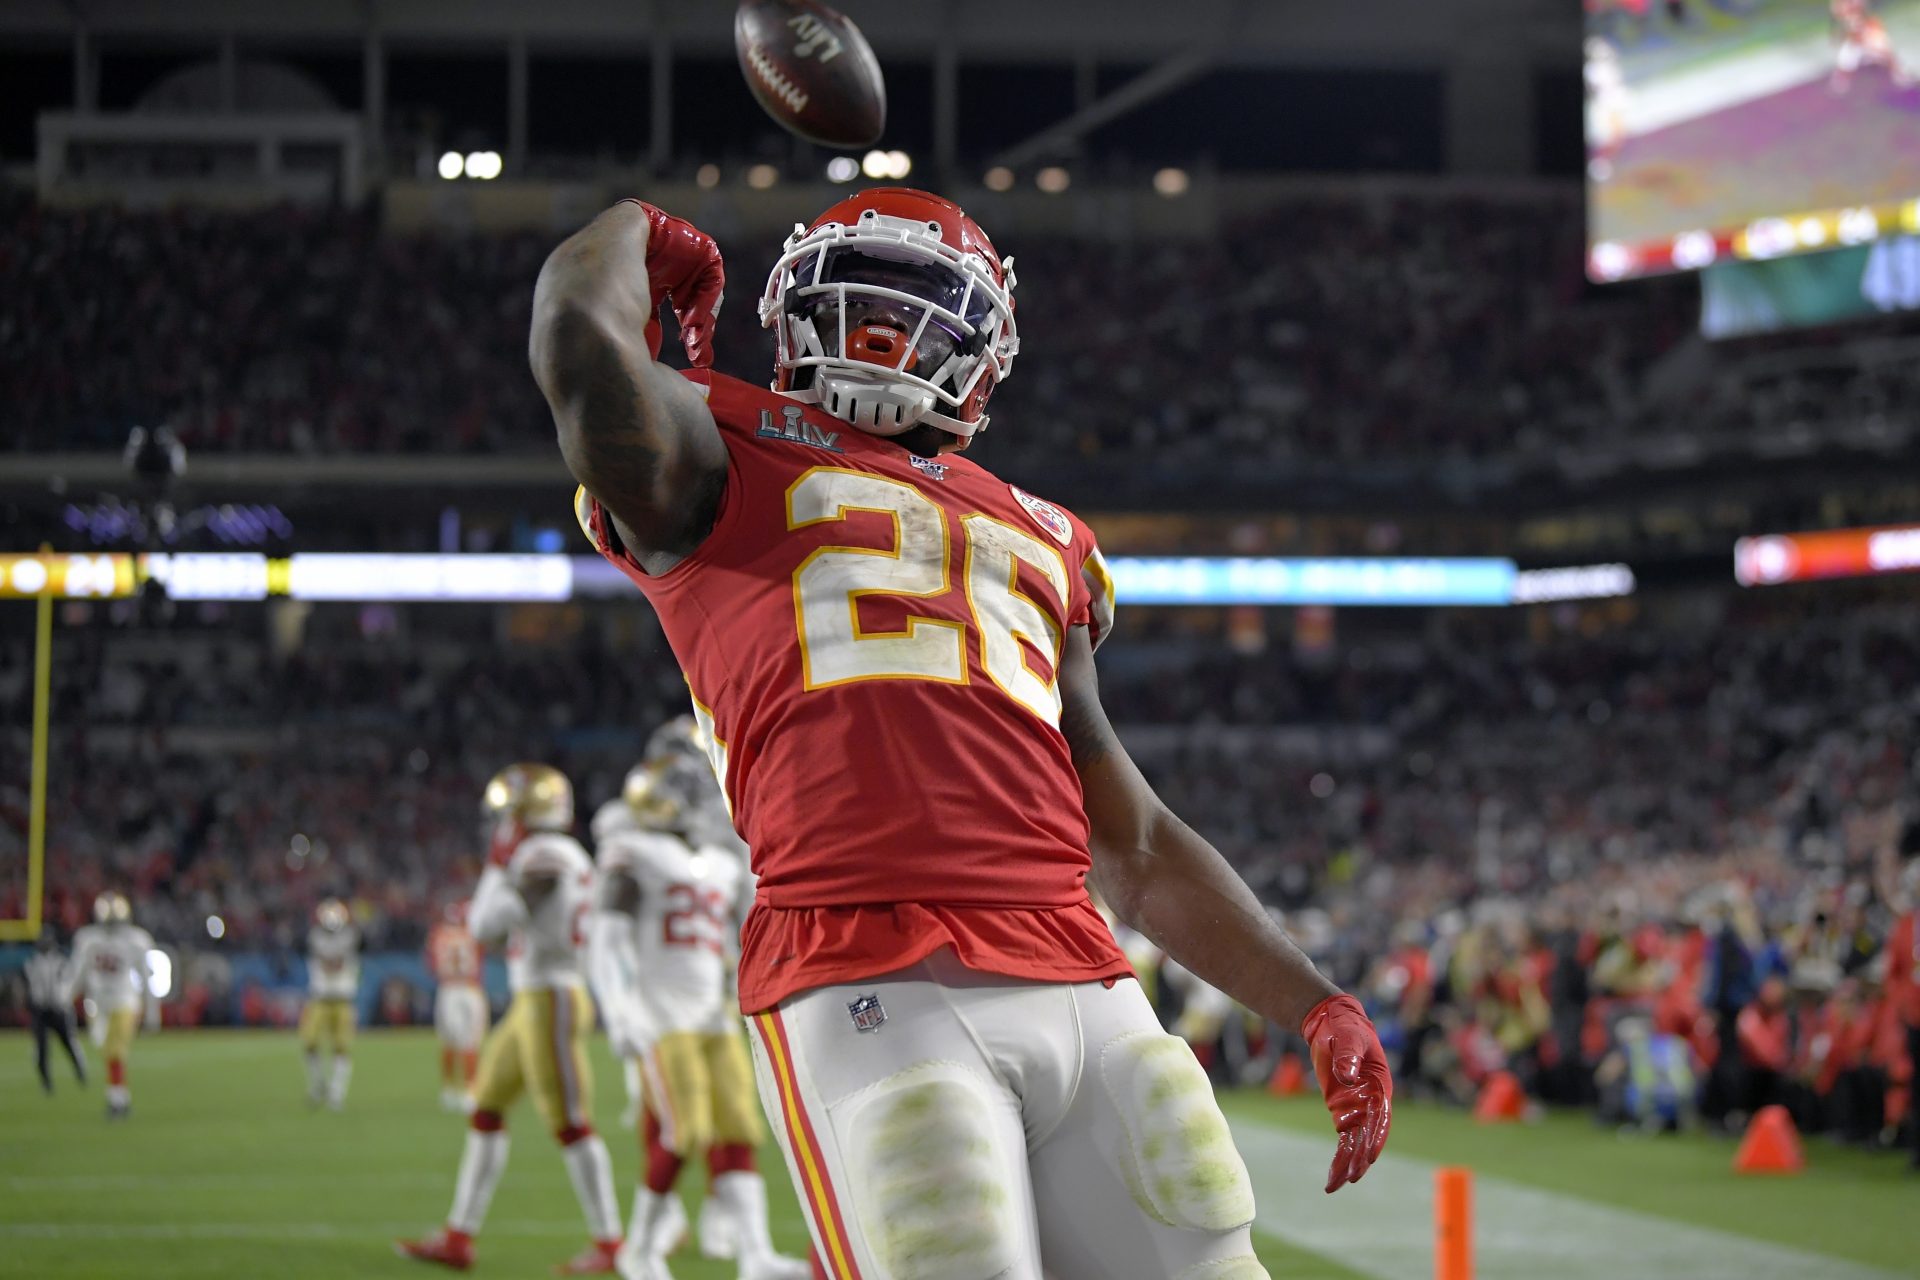 Kansas City Chiefs' Damien Williams celebrates his touchdown against the San Francisco 49ers during the second half of the NFL Super Bowl 54 football game Sunday, Feb. 2, 2020, in Miami Gardens, Fla.